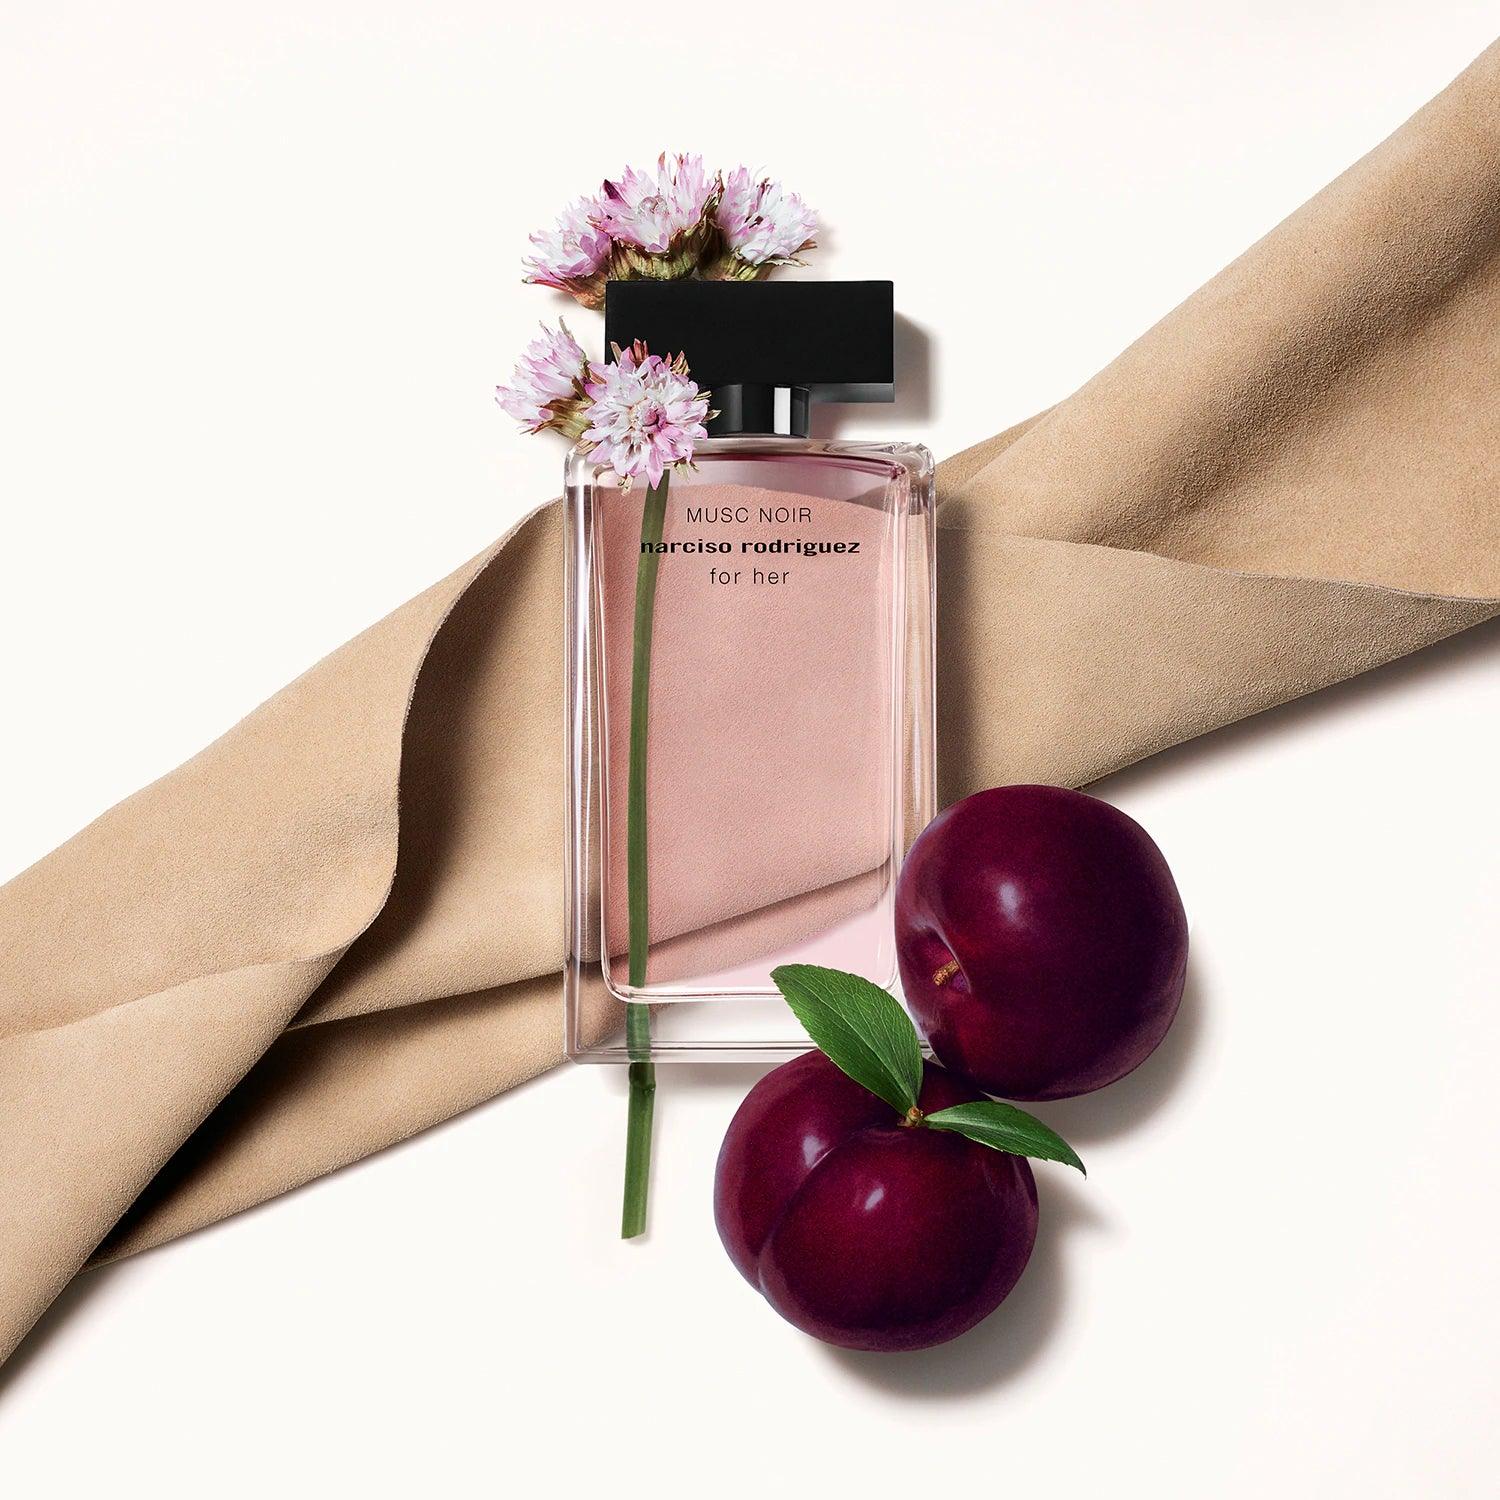 Narciso Rodriguez MUSC NOIR for Her - Parfum Gallerie